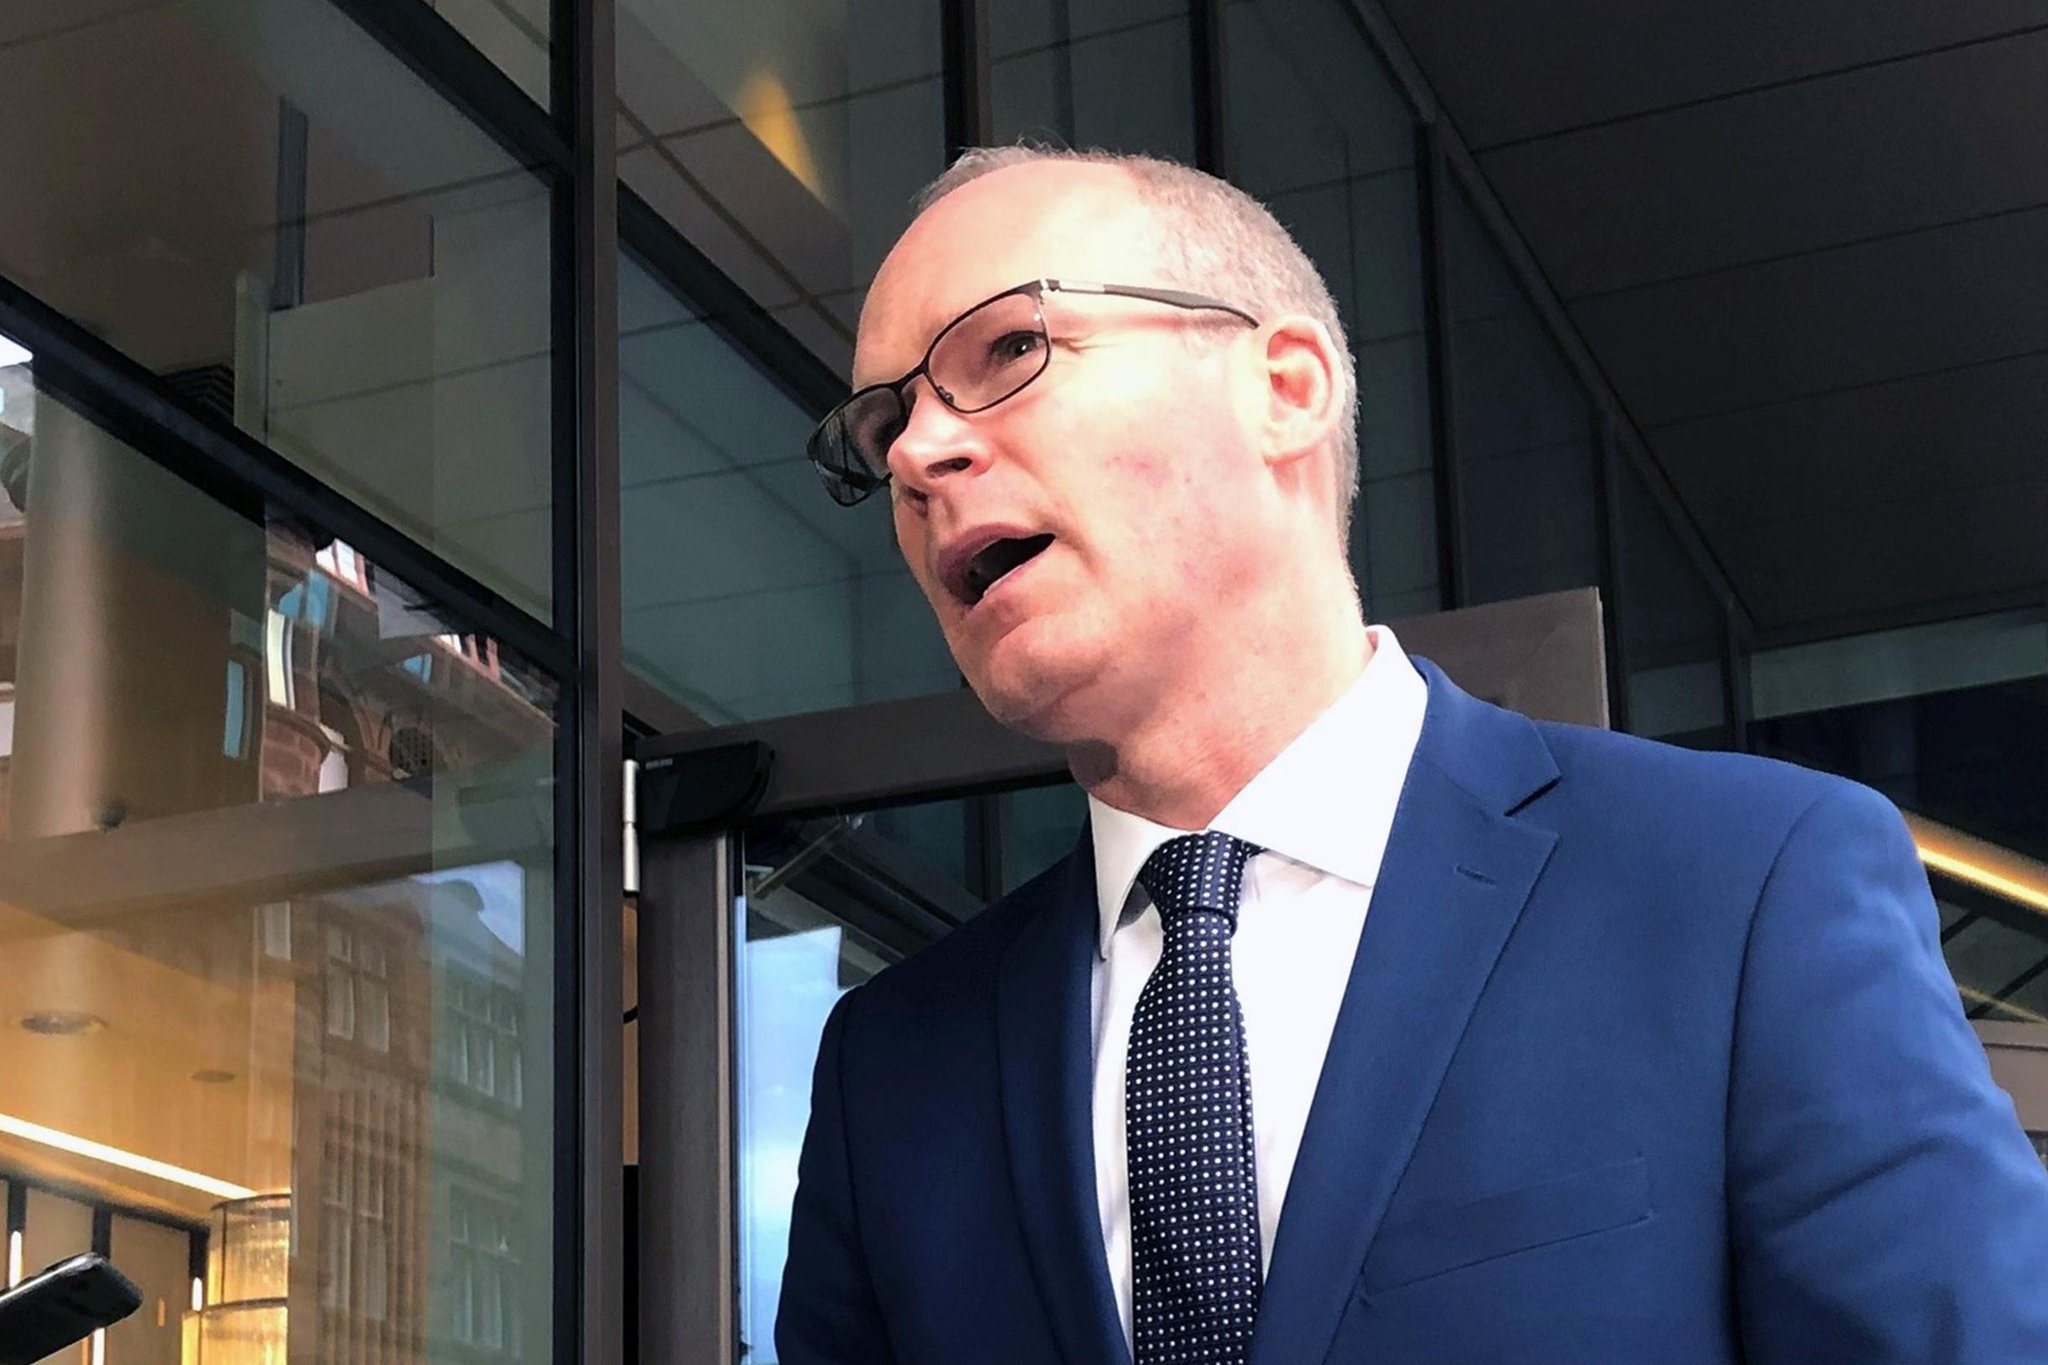 Simon Coveney removed from Belfast peace event after security alert